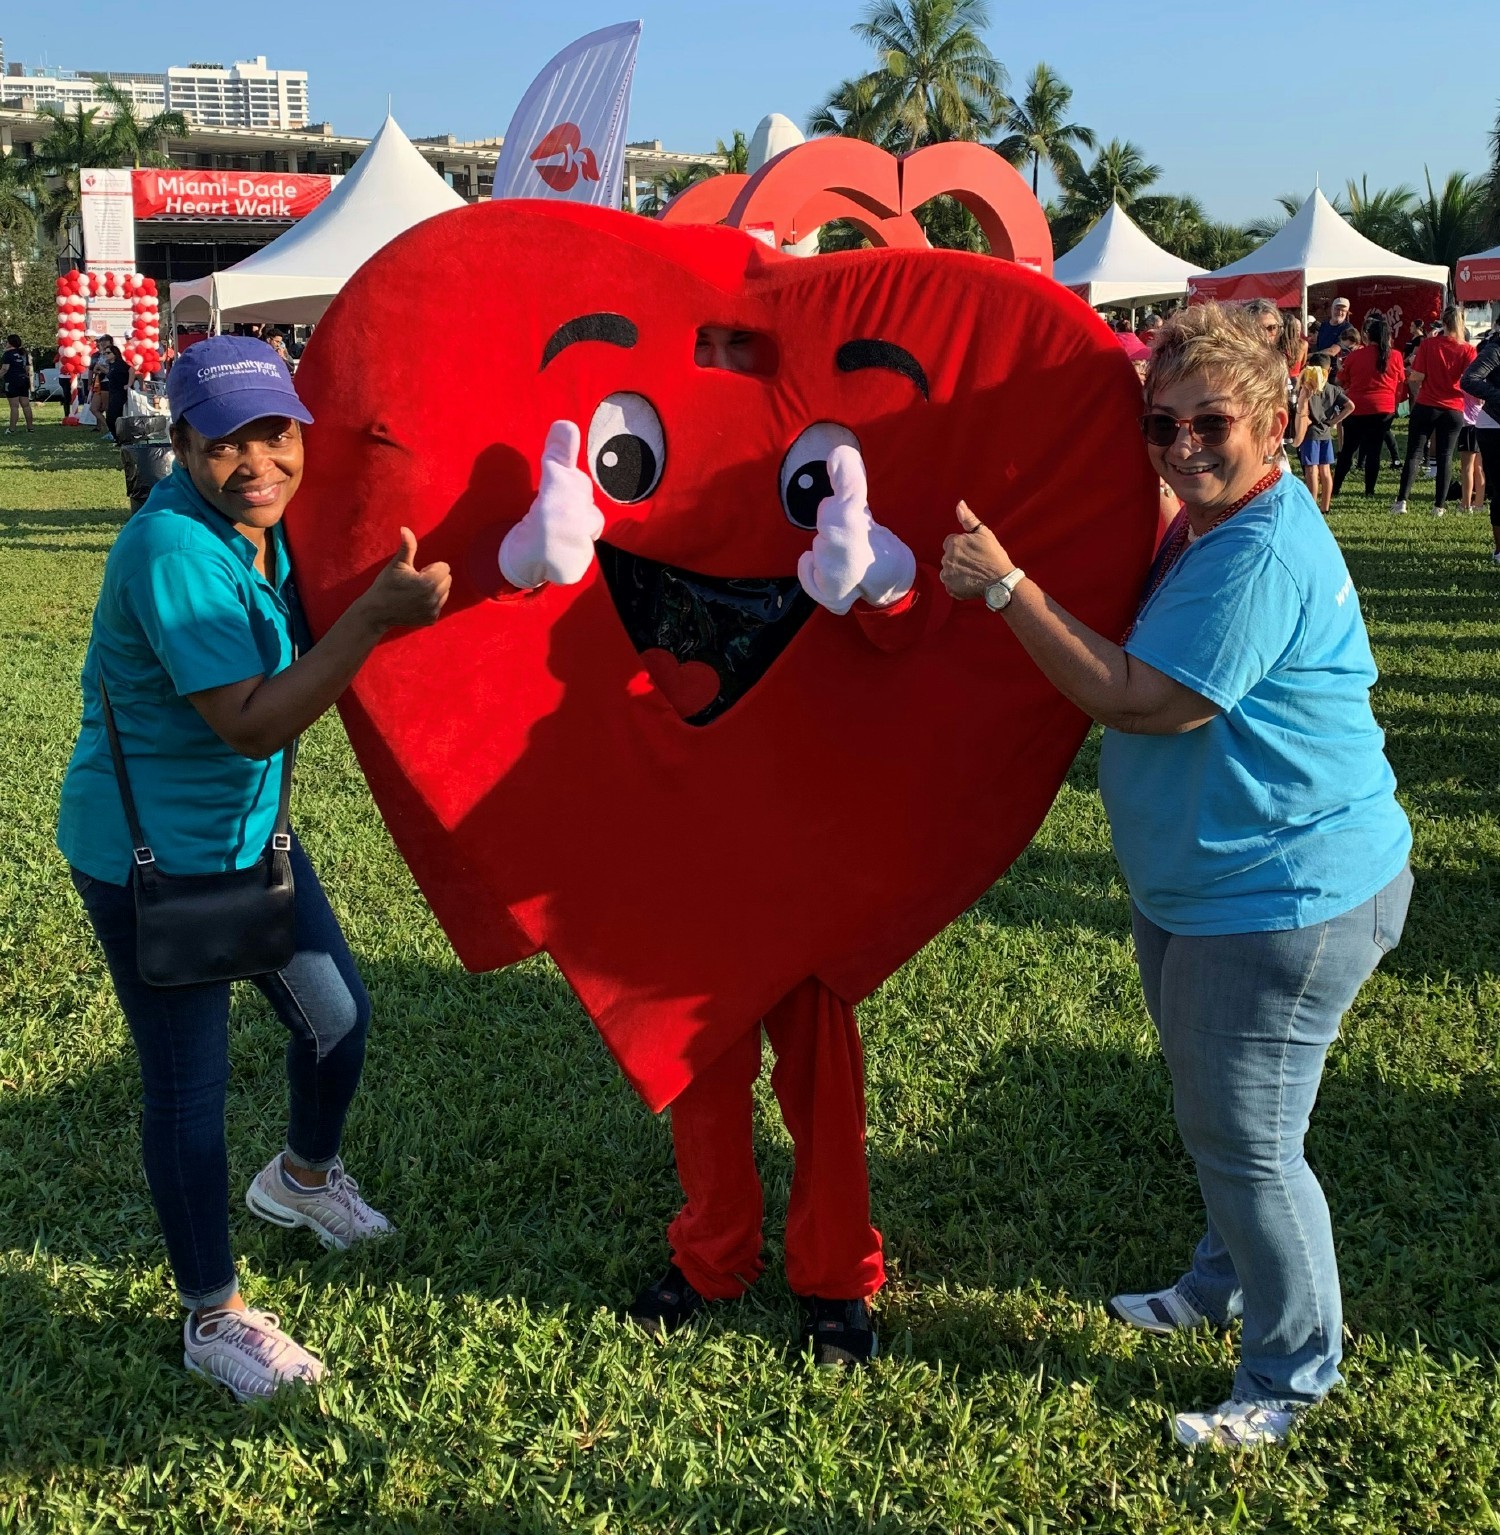 As the health plan with a heart, we give a thumbs up to heart health at the American Heart Association's Heart Walk.